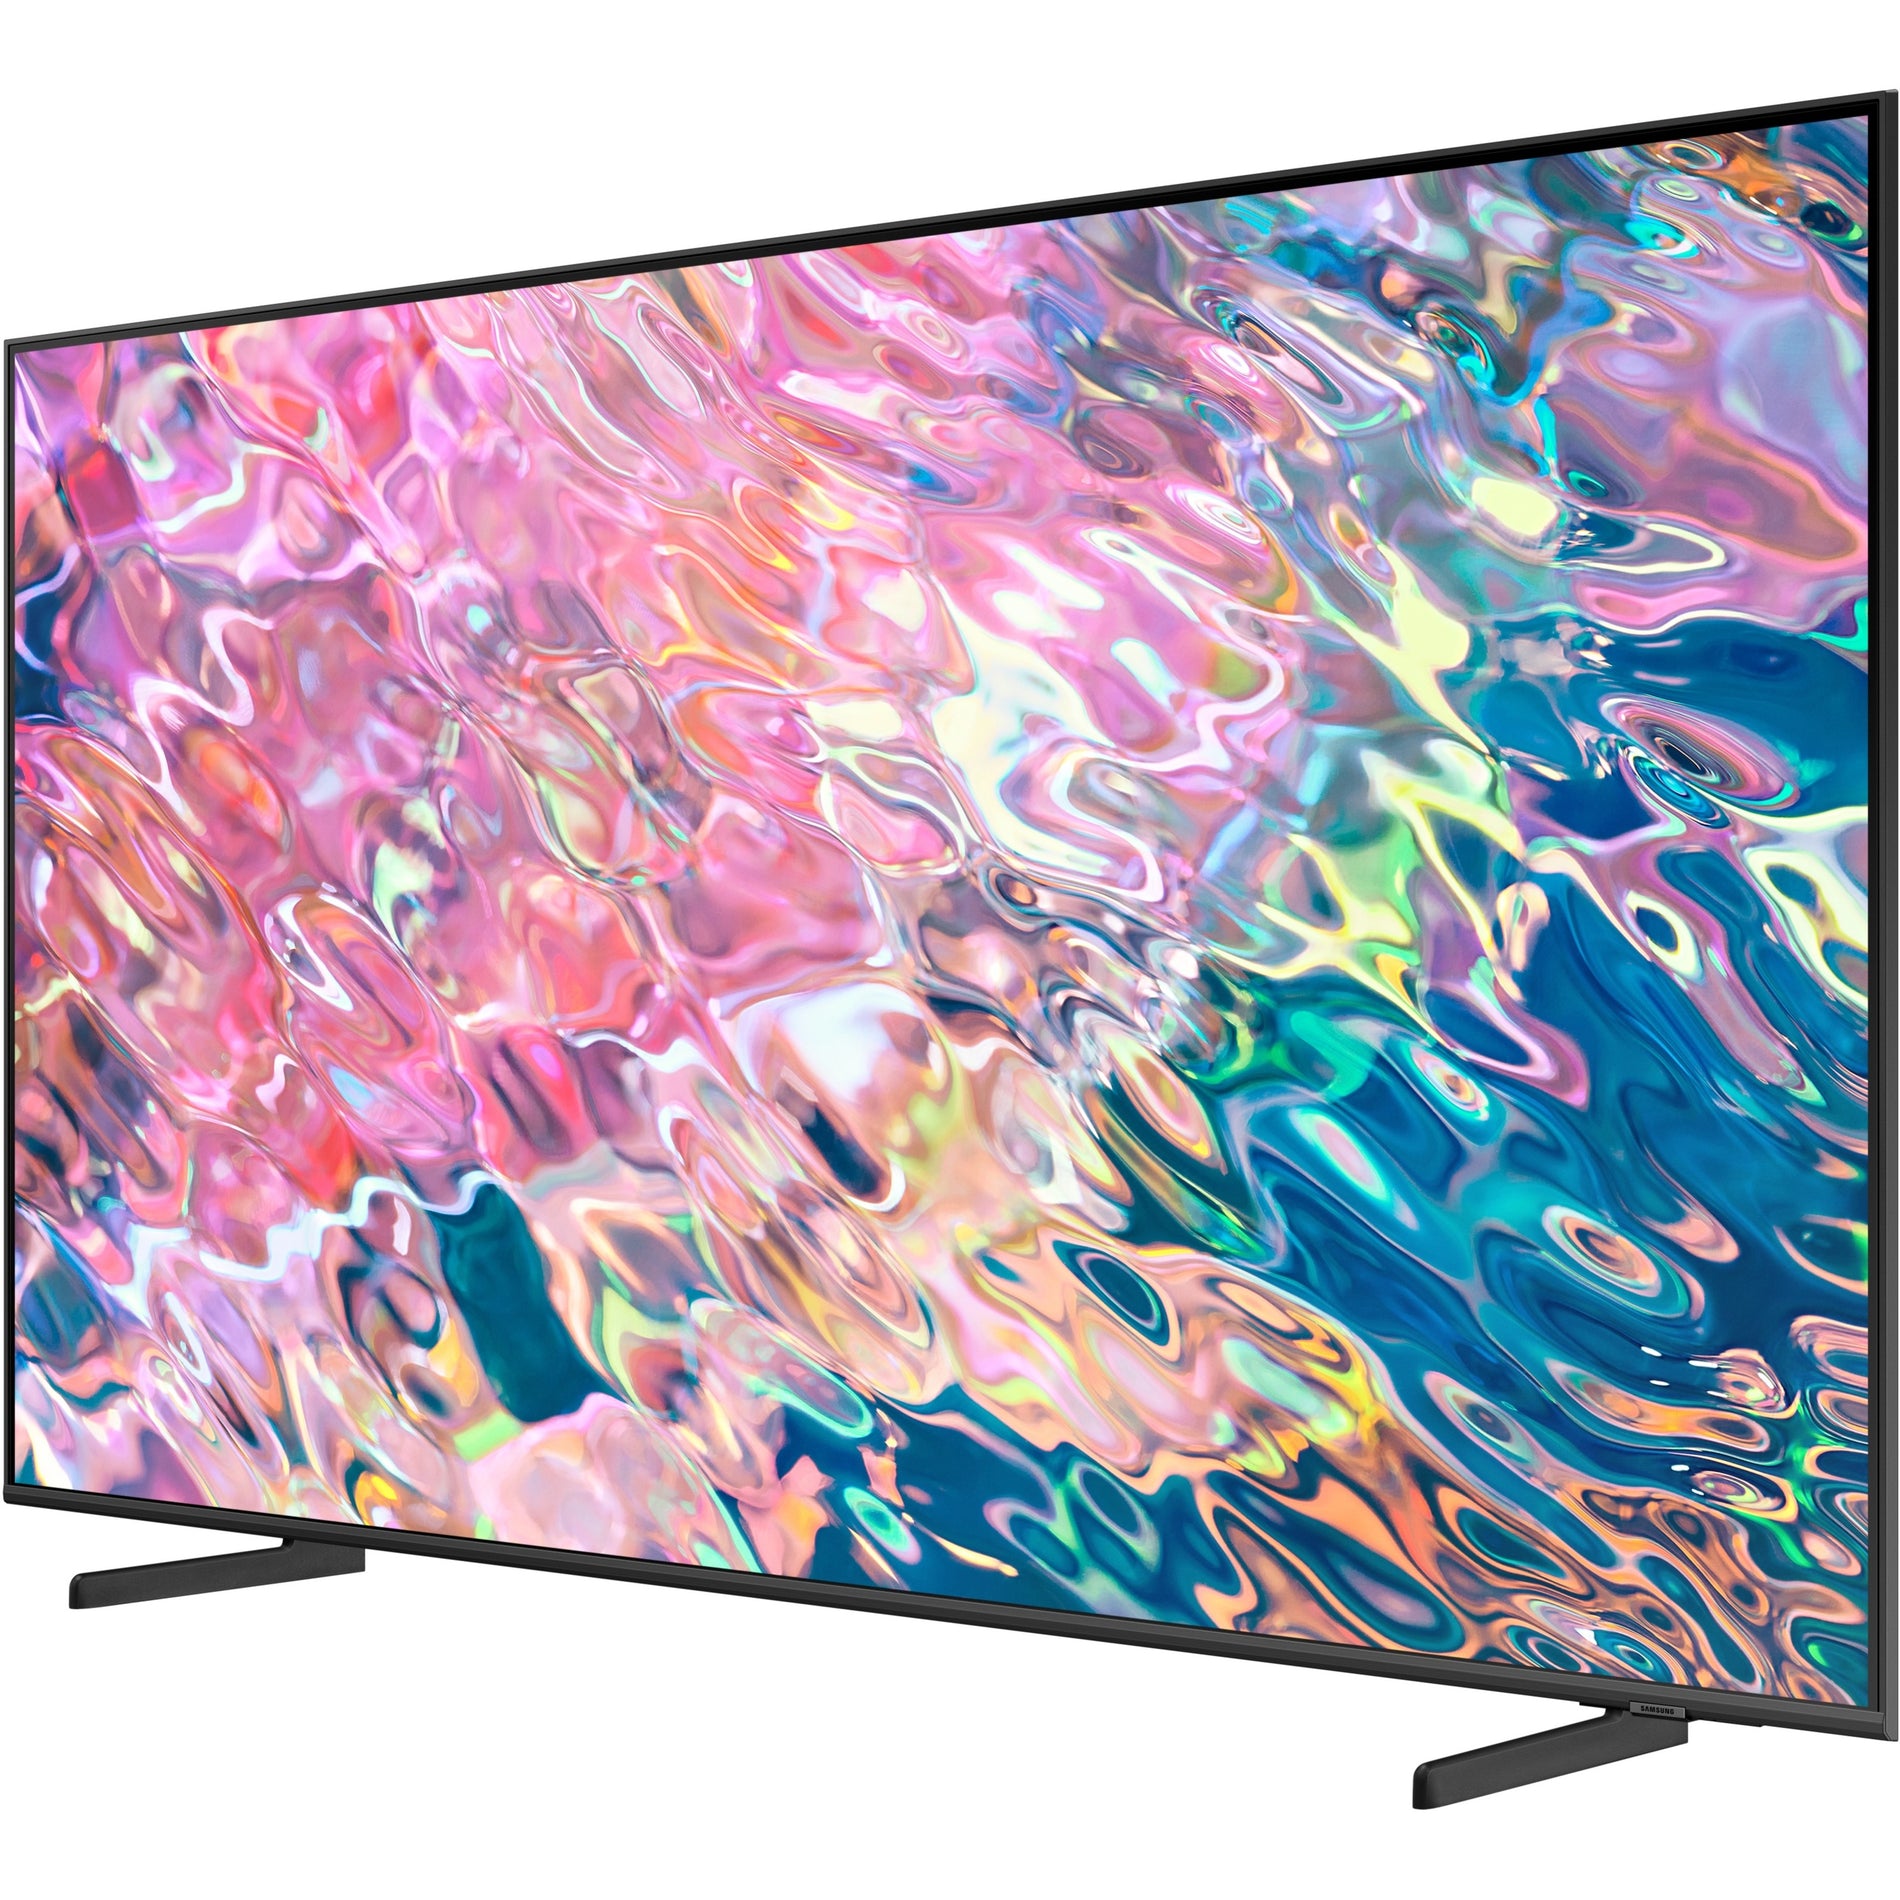 Samsung 60" QLED 2160p 120Hz 4K, Dual LED, Smart TV, 3 HMDI ports, Color Volume 100% (Quantum Dot), Quantum Processor Lite 4K with AI Upscaling, Object Tracking Sound, Ambient Mode, Included Accessory: SolarCell Remote (QN60Q60BAFXZA) [Discontinued]